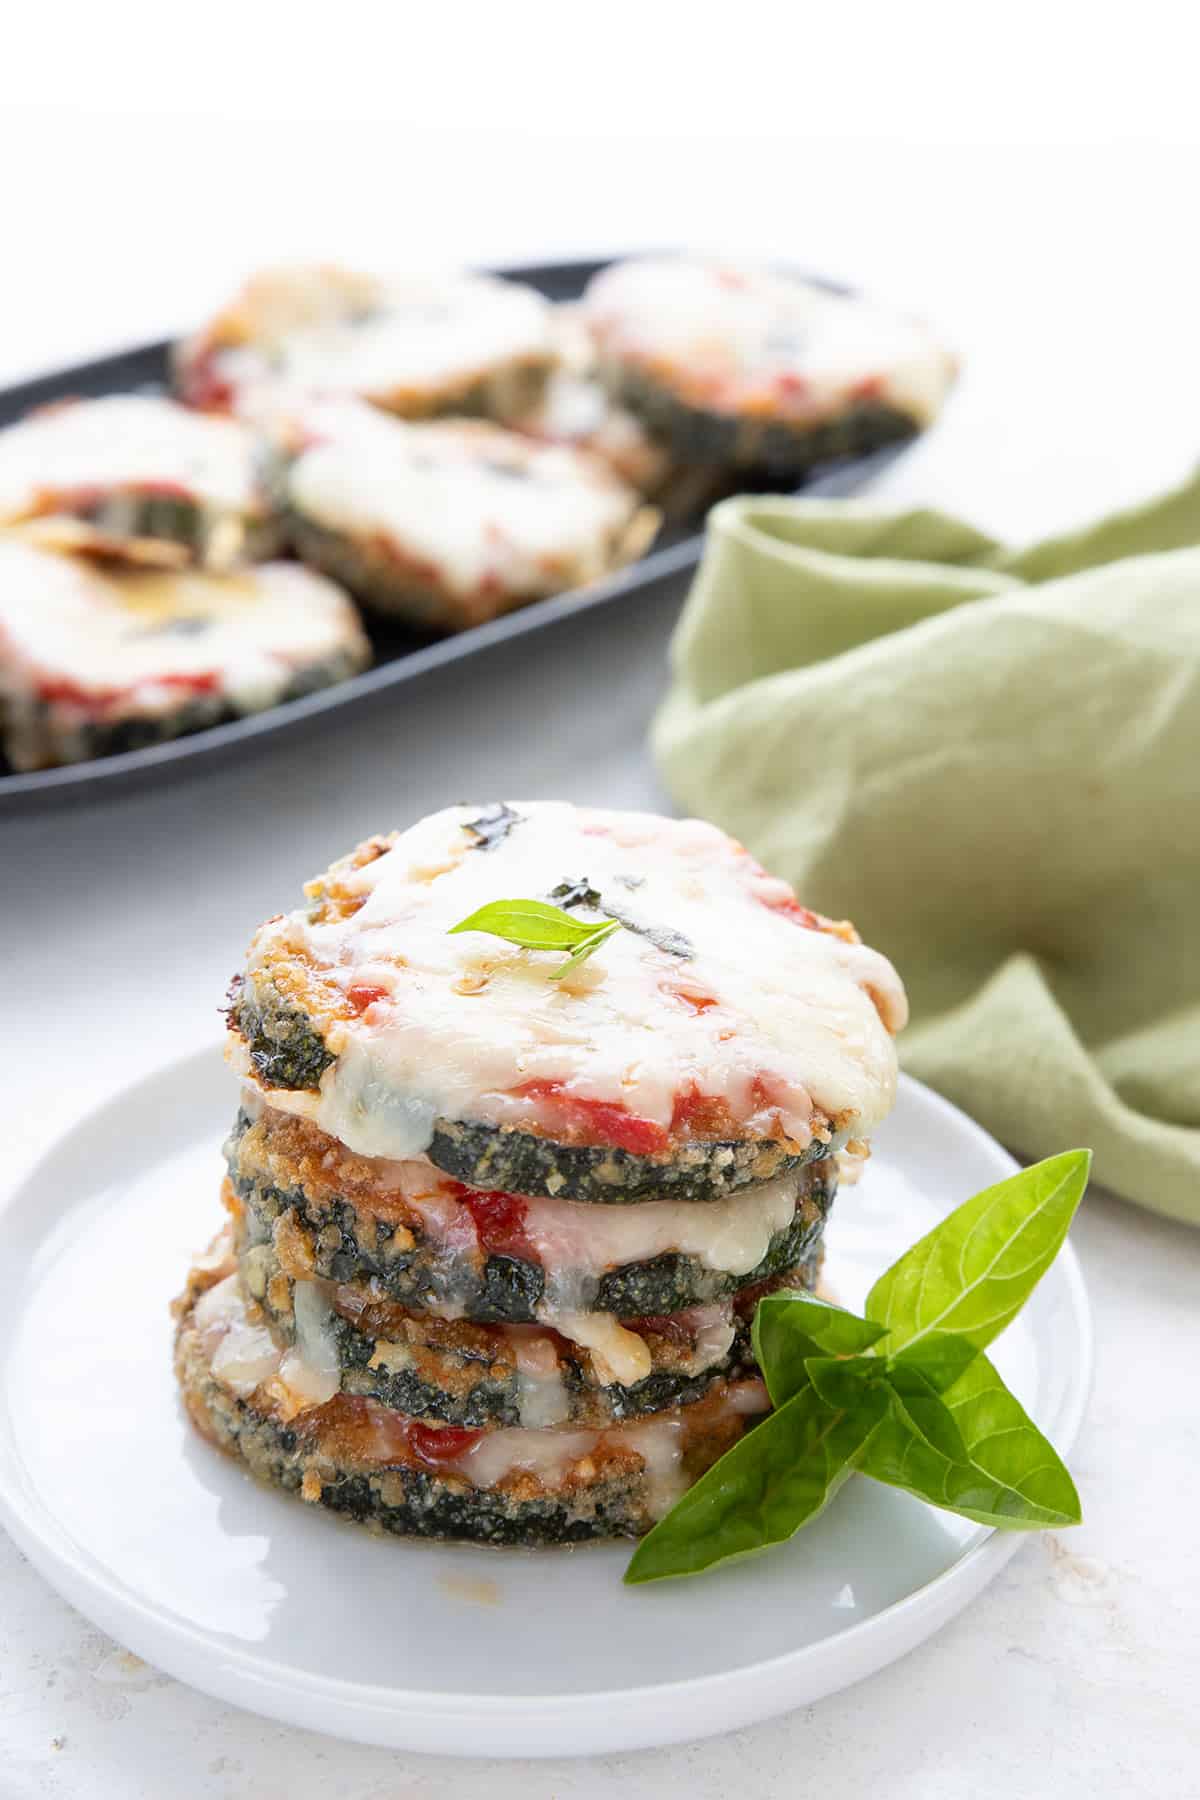 Zucchini Parmesan stacked up on a white plate with a green napkin in the background.